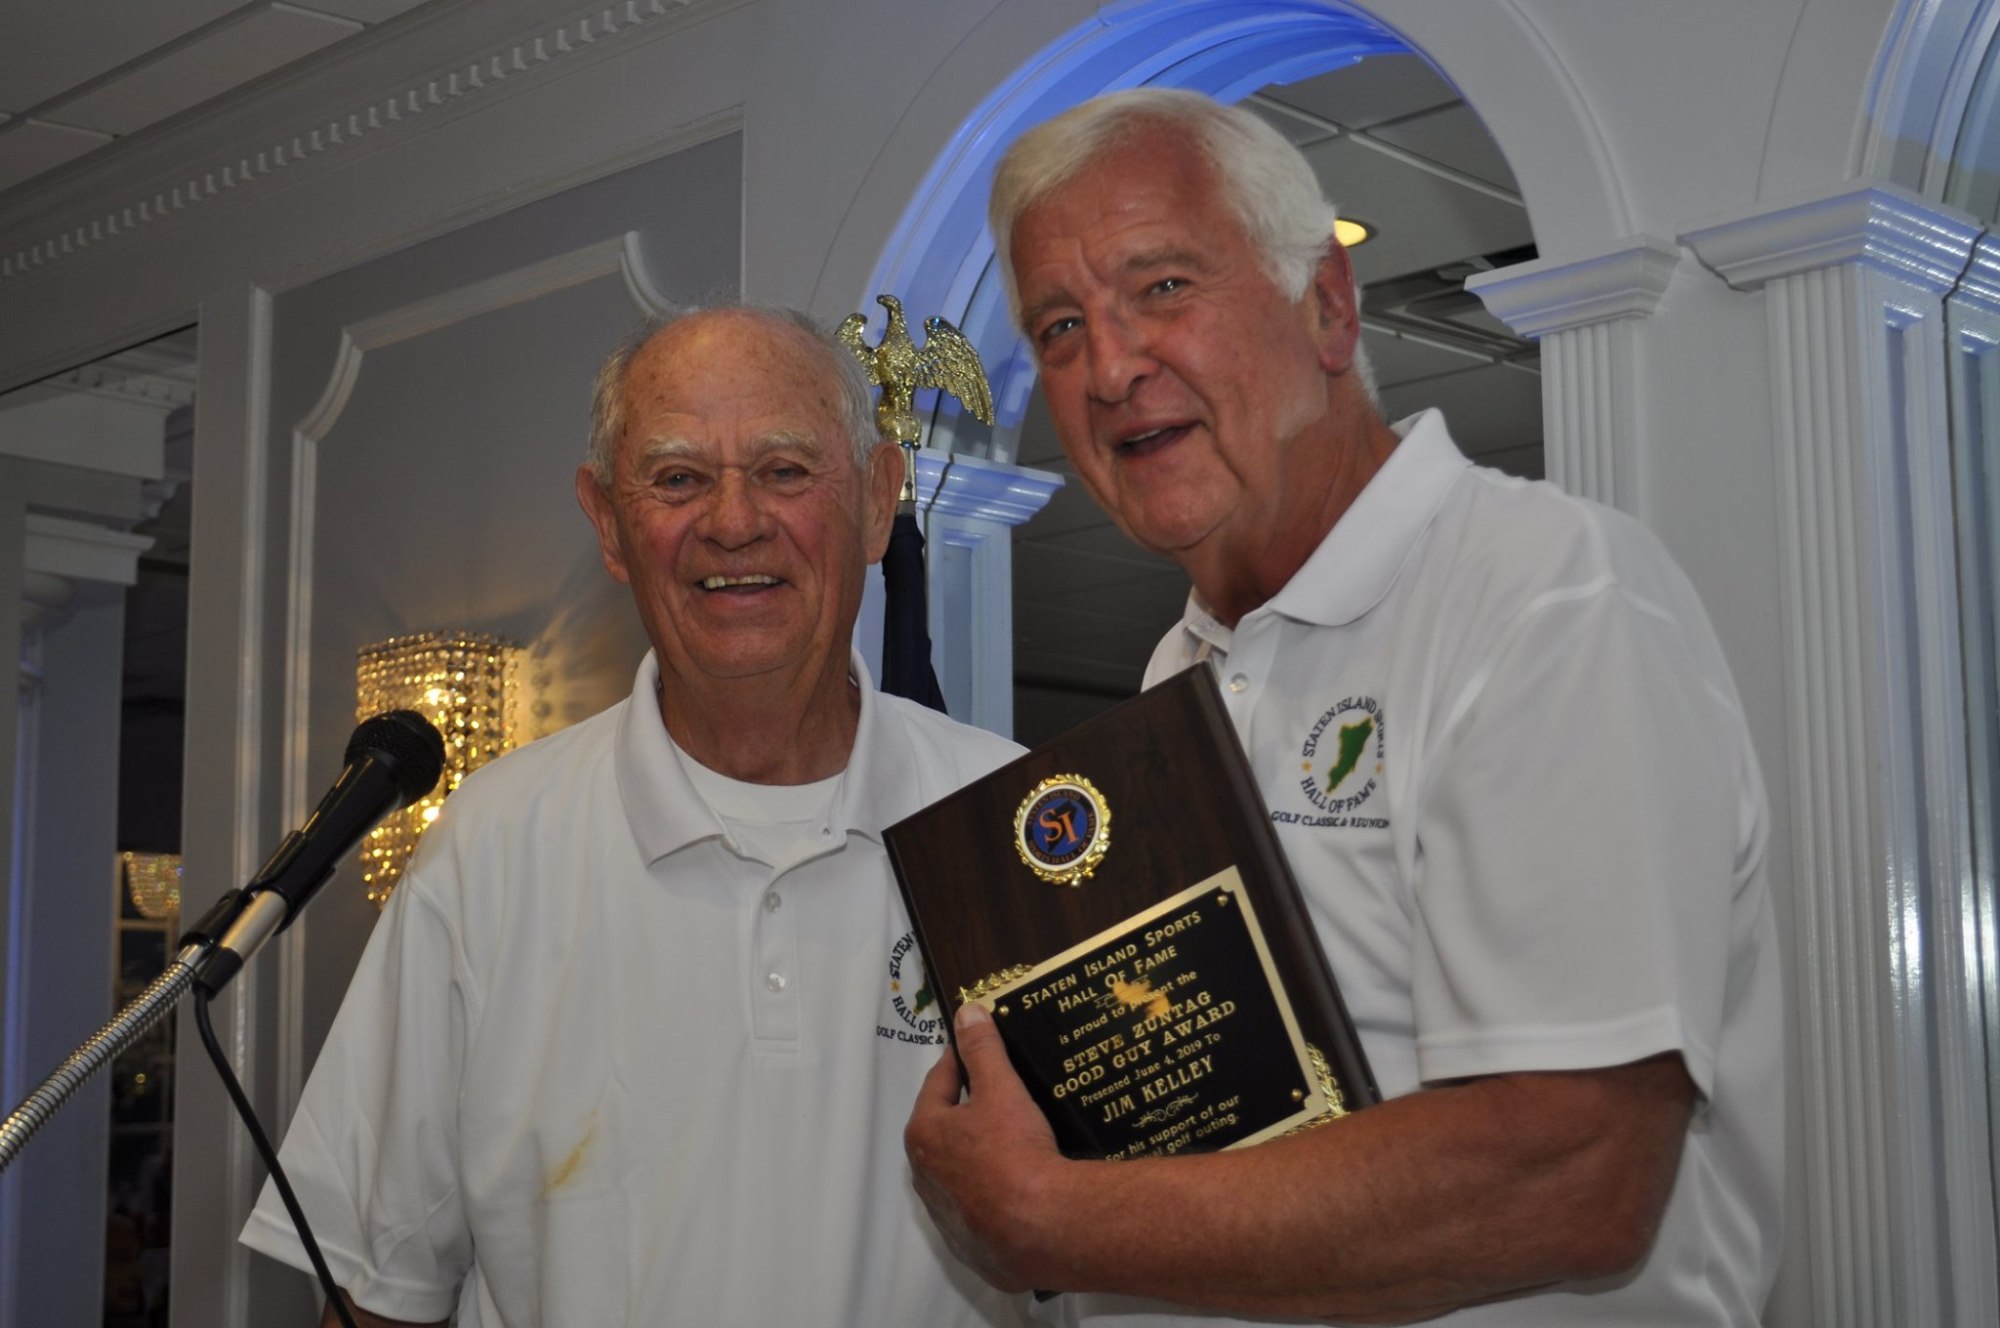 Staten Island Sports Hall of Fame Golf Outing and Reunion